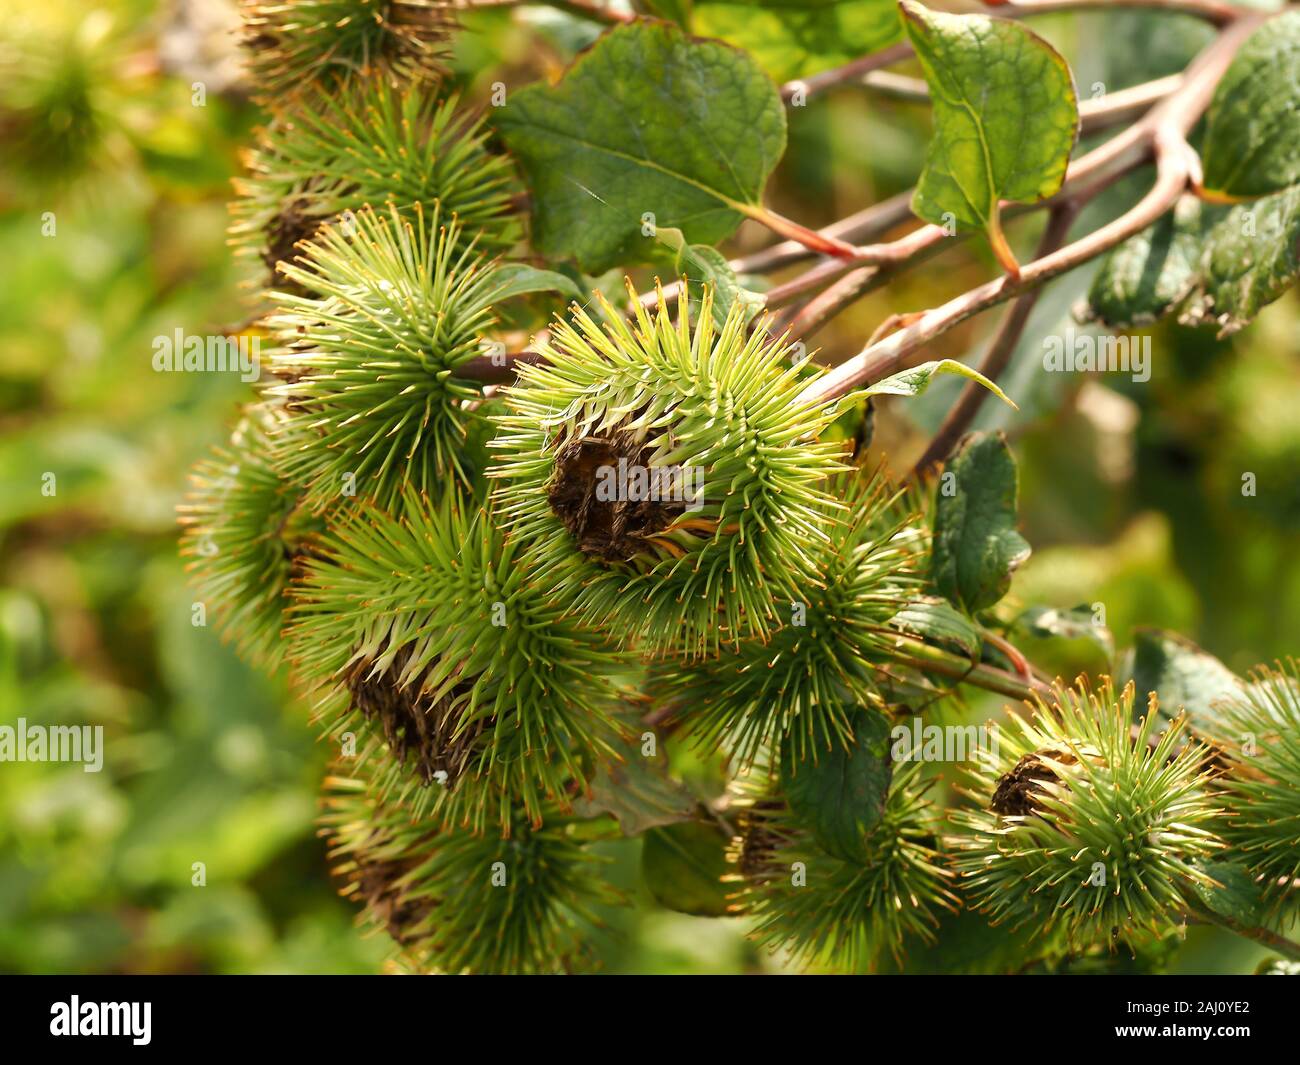 Finished flowers and green leaves of burdock, Arctium, in late summer in North Yorkshire, England Stock Photo